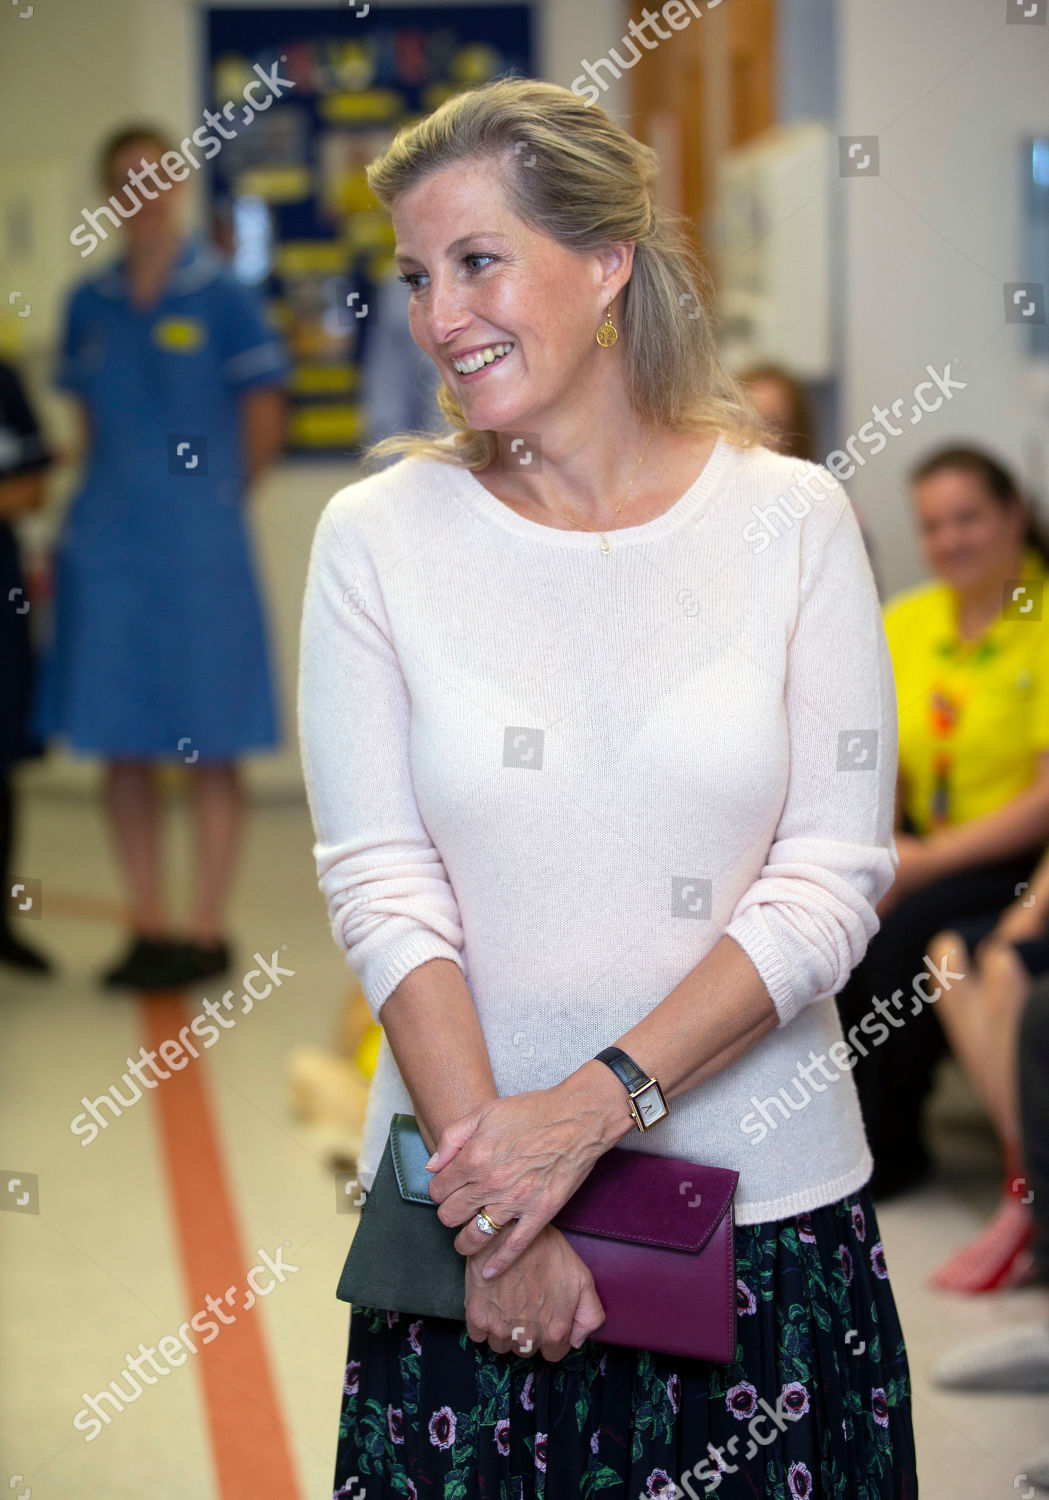 sophie-countess-of-wessex-visit-to-musgrove-park-hospital-taunton-somerset-uk-shutterstock-editorial-10422506aa.jpg